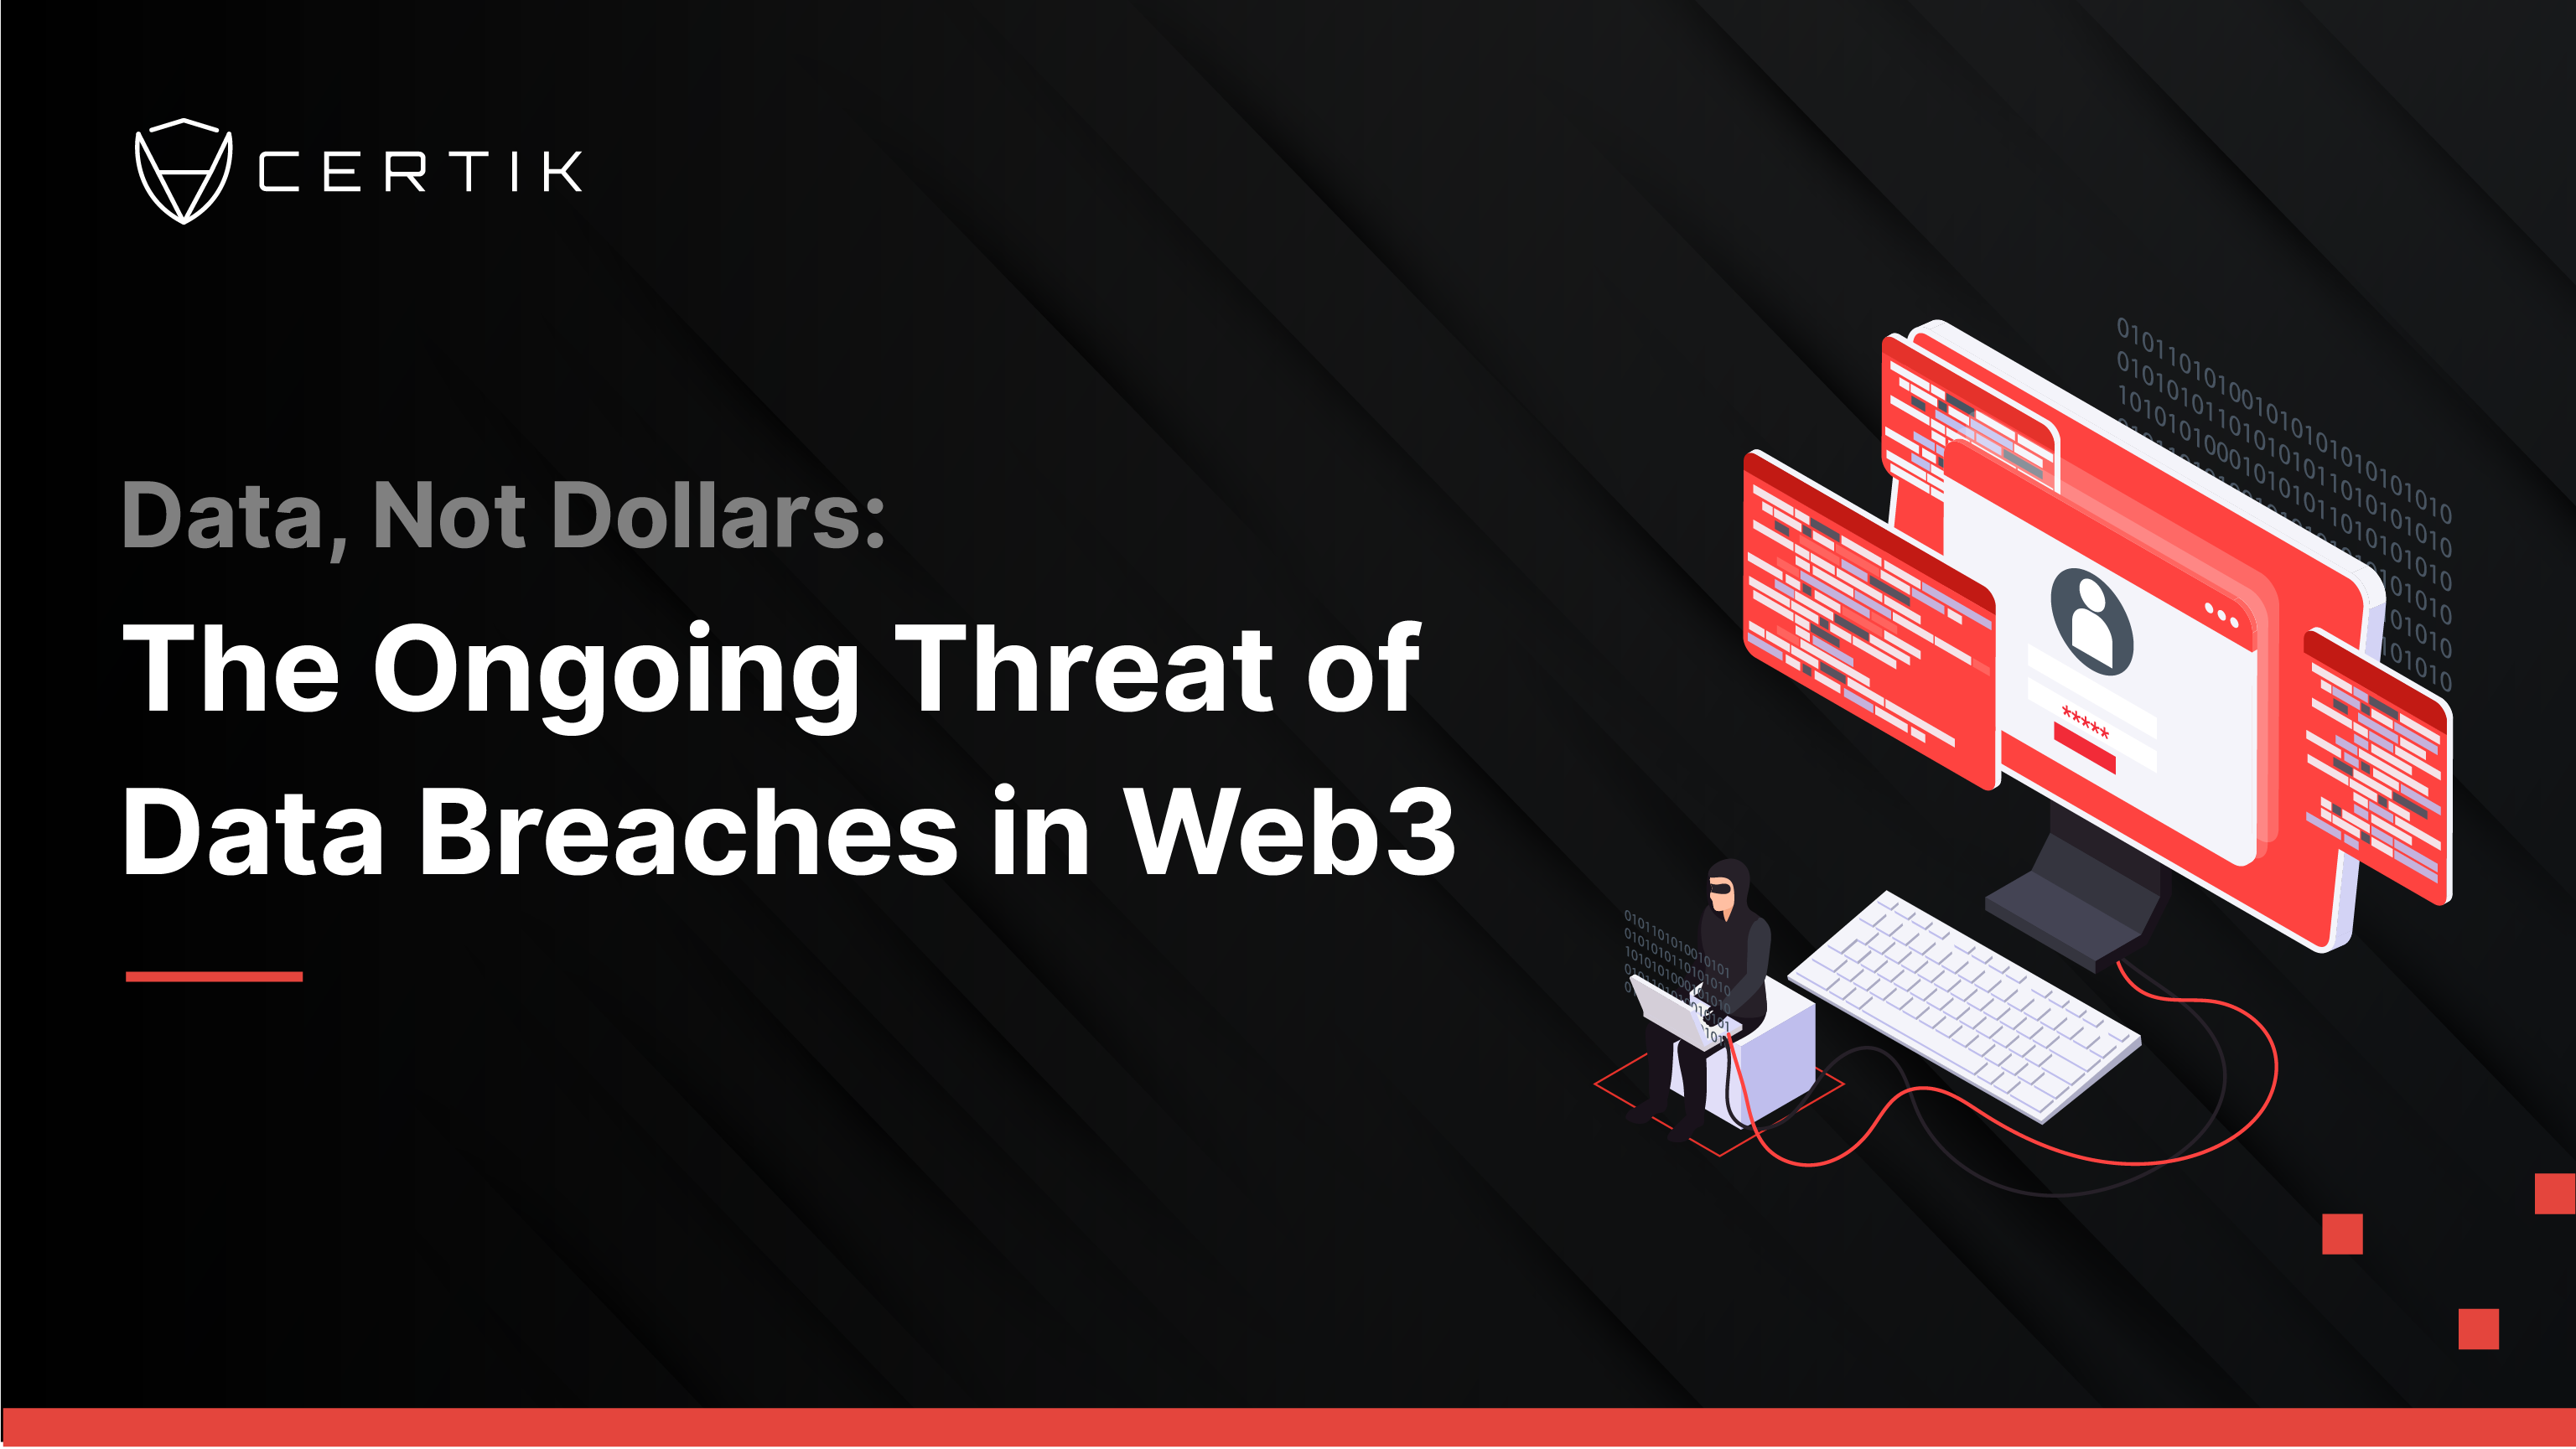 Data, Not Dollars: The Ongoing Threat of Data Breaches in Web3